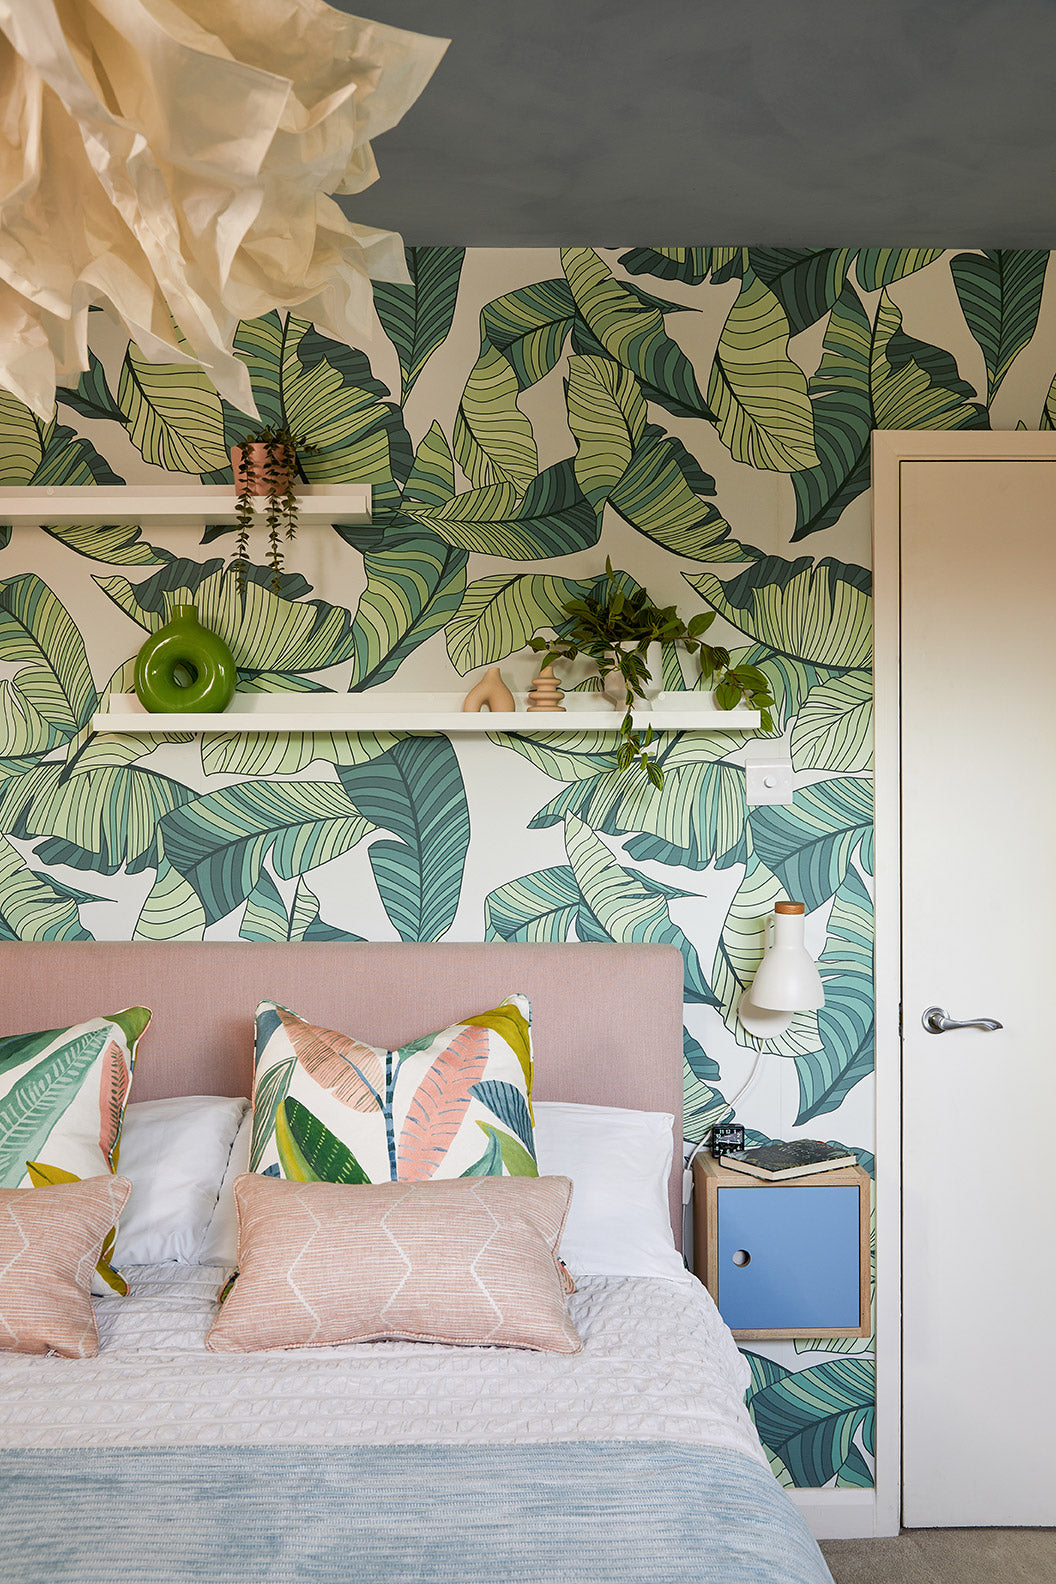 Botanical Bedroom by Maria Chandler / Become Interiors. Photo: Chris Snook